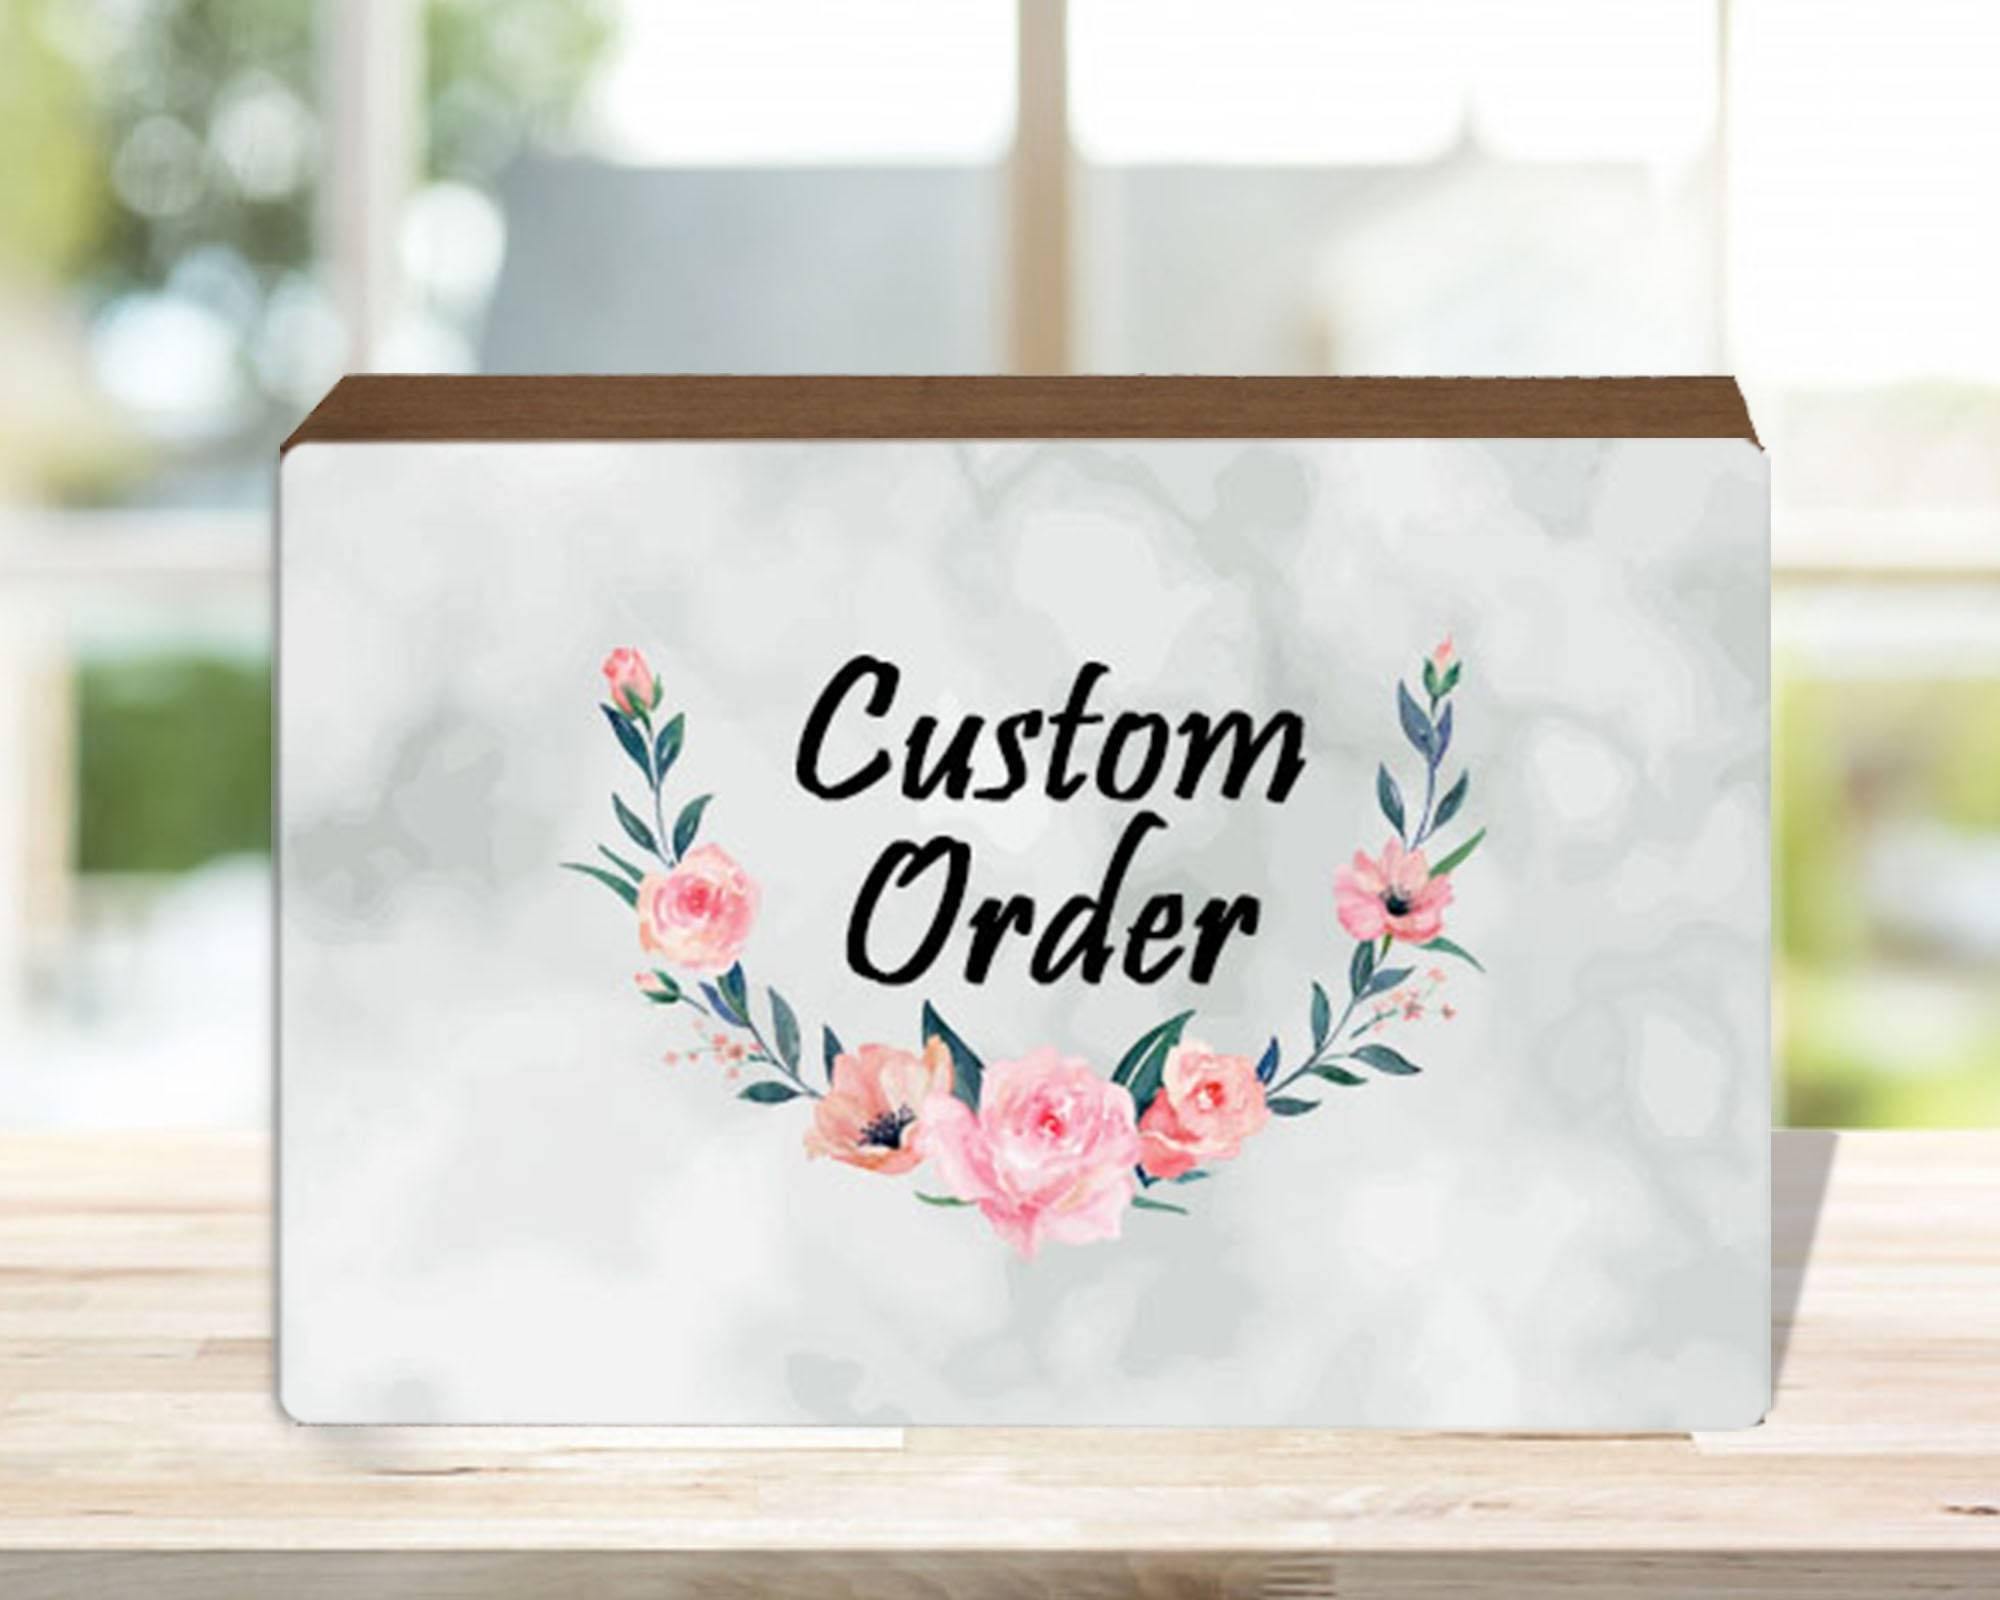 Custom Photo ShoutBox | Personalized Home Décor | Custom Order - This & That Solutions - Custom Photo ShoutBox | Personalized Home Décor | Custom Order - Personalized Gifts & Custom Home Decor